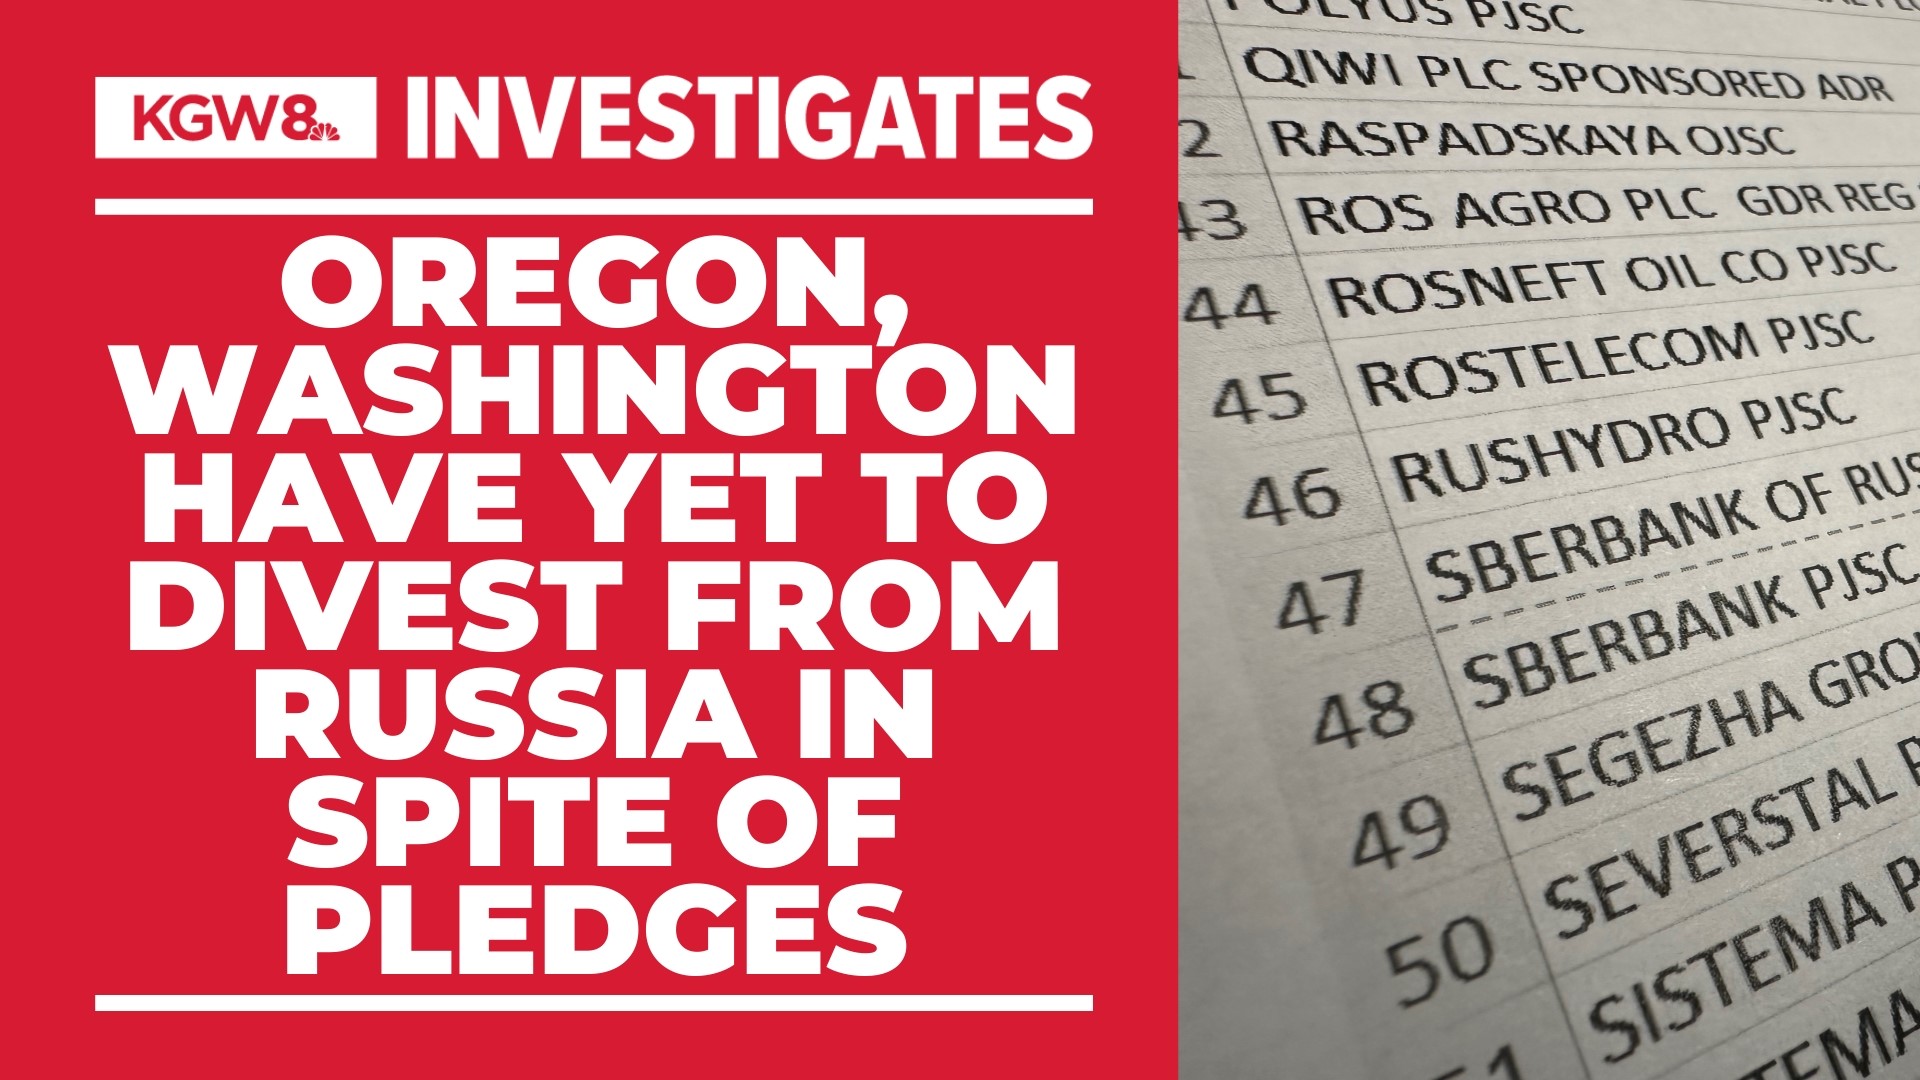 Two years after the invasion of Ukraine, Oregon and Washington still have millions of dollars invested in Russia despite promises to divest.